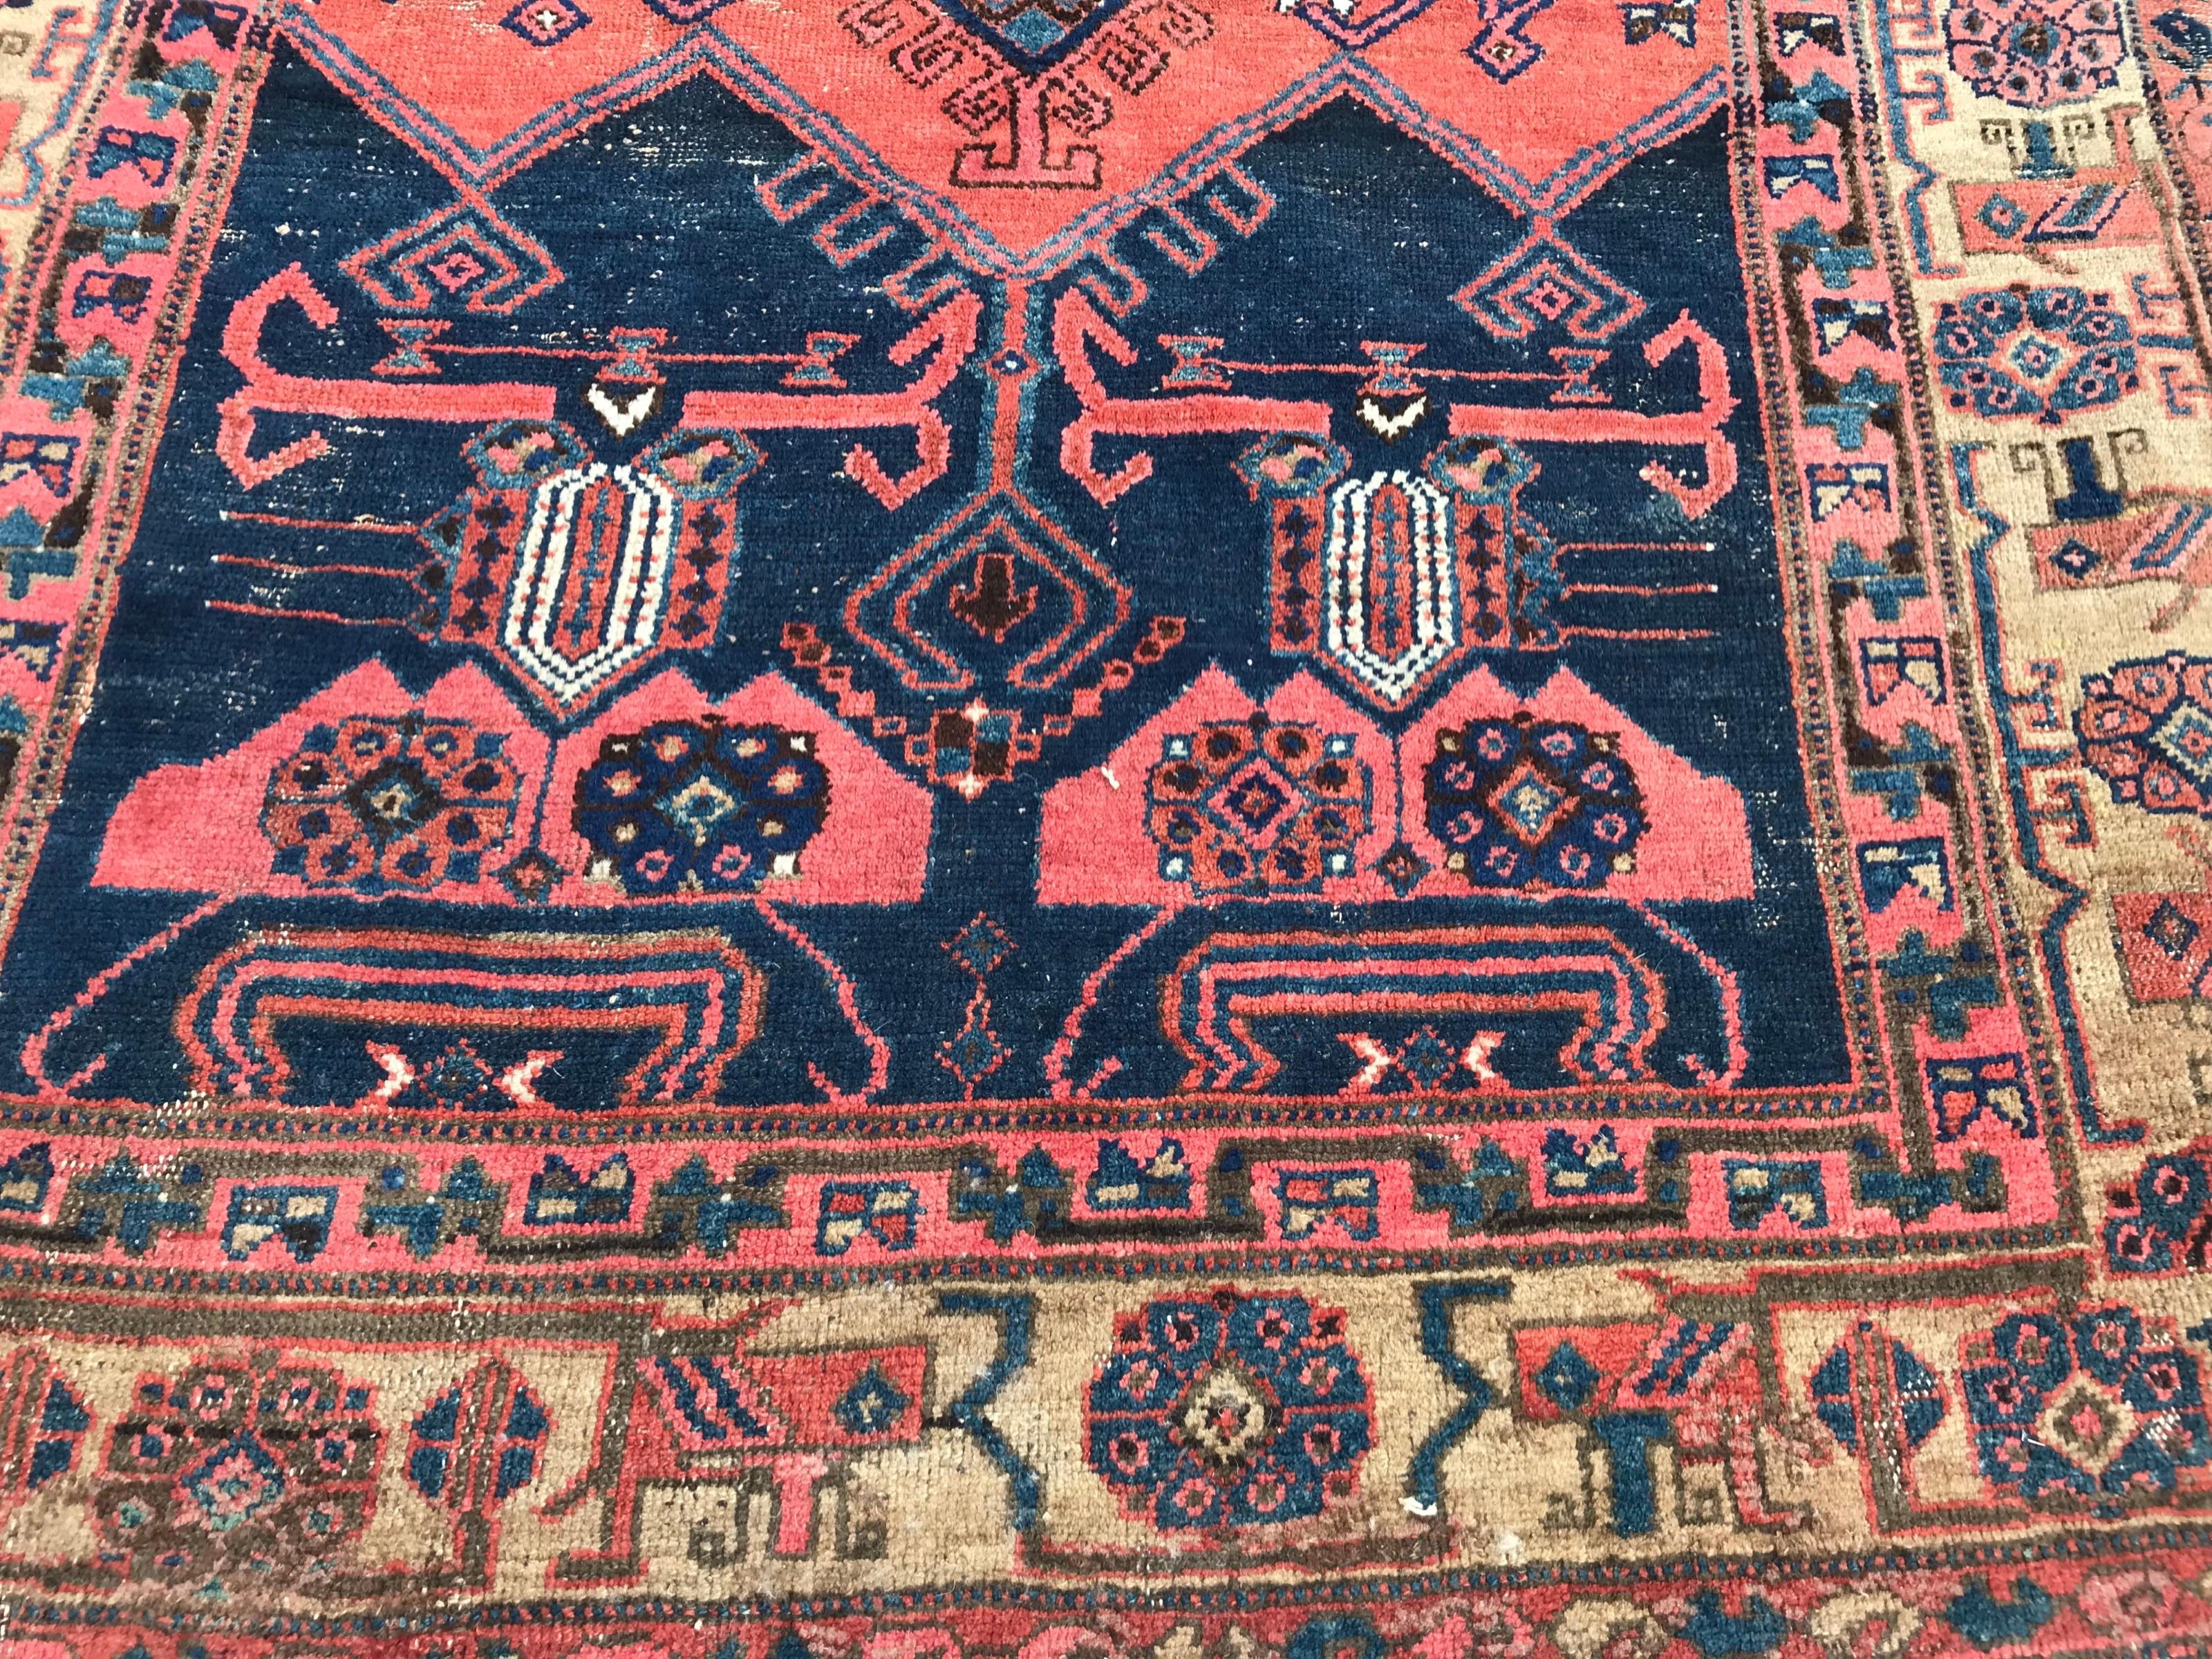 Discover the exquisite craftsmanship of this late 19th-century tribal Kurdish rug. Adorned with a stunning geometric design and natural hues of red, blue, green, yellow, and purple, this hand-knotted masterpiece features wool velvet on cotton